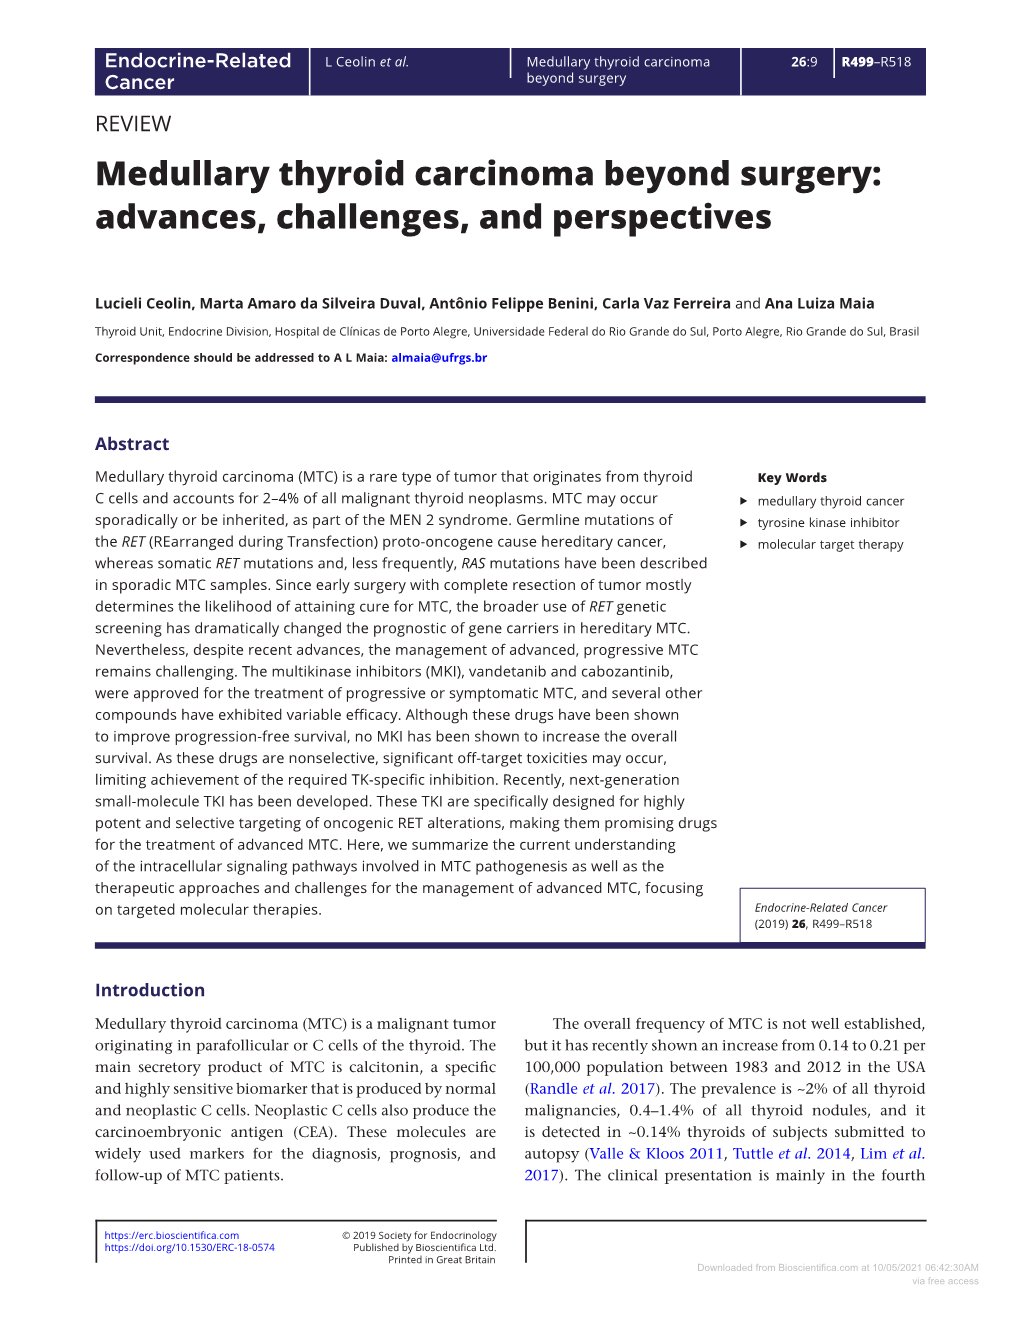 Medullary Thyroid Carcinoma Beyond Surgery: Advances, Challenges, and Perspectives